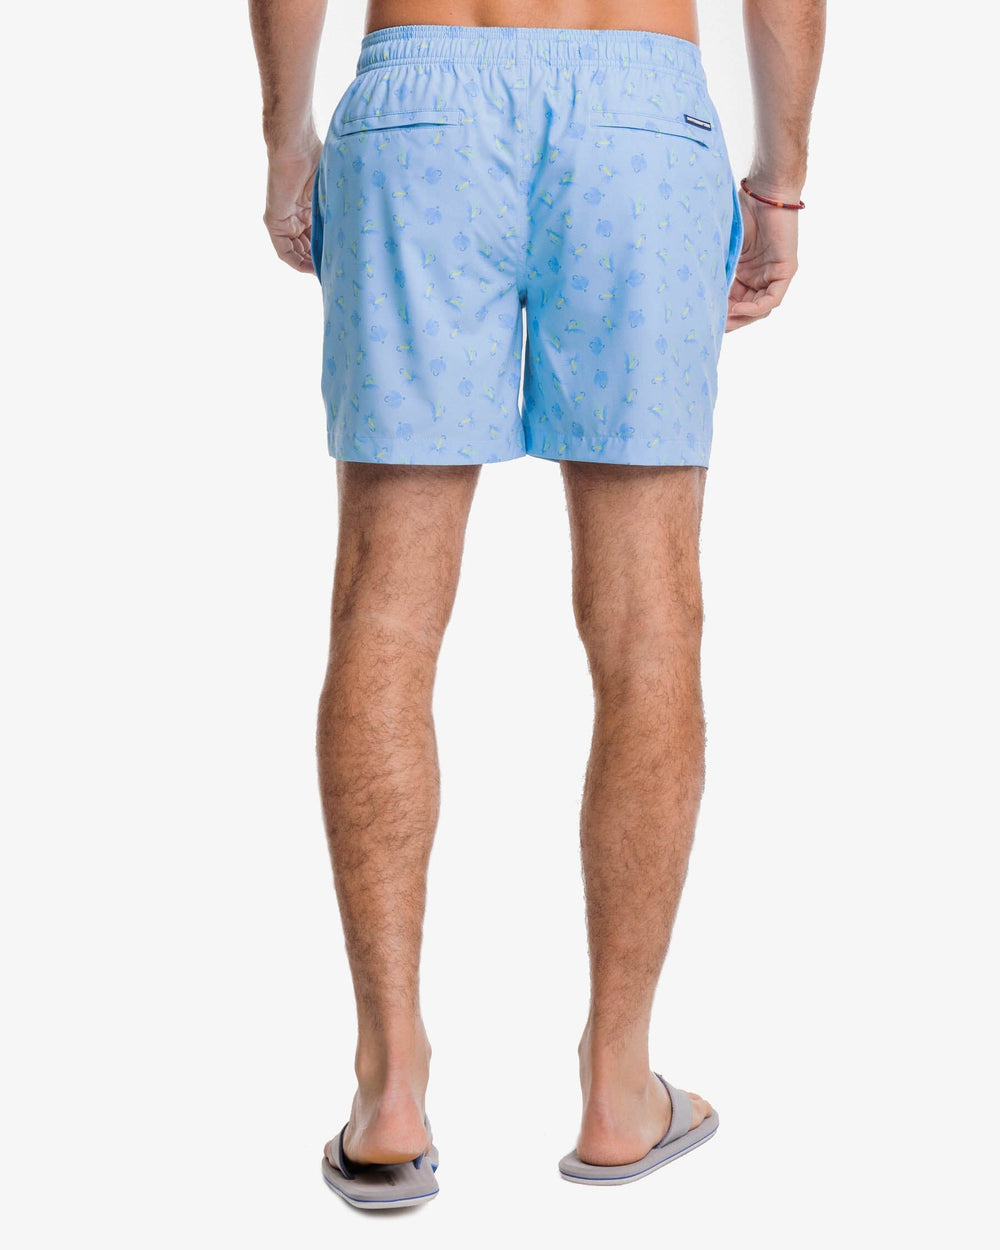 The back view of the Southern Tide Guy With Allure Printed Swim Trunk by Southern Tide - Rain Water